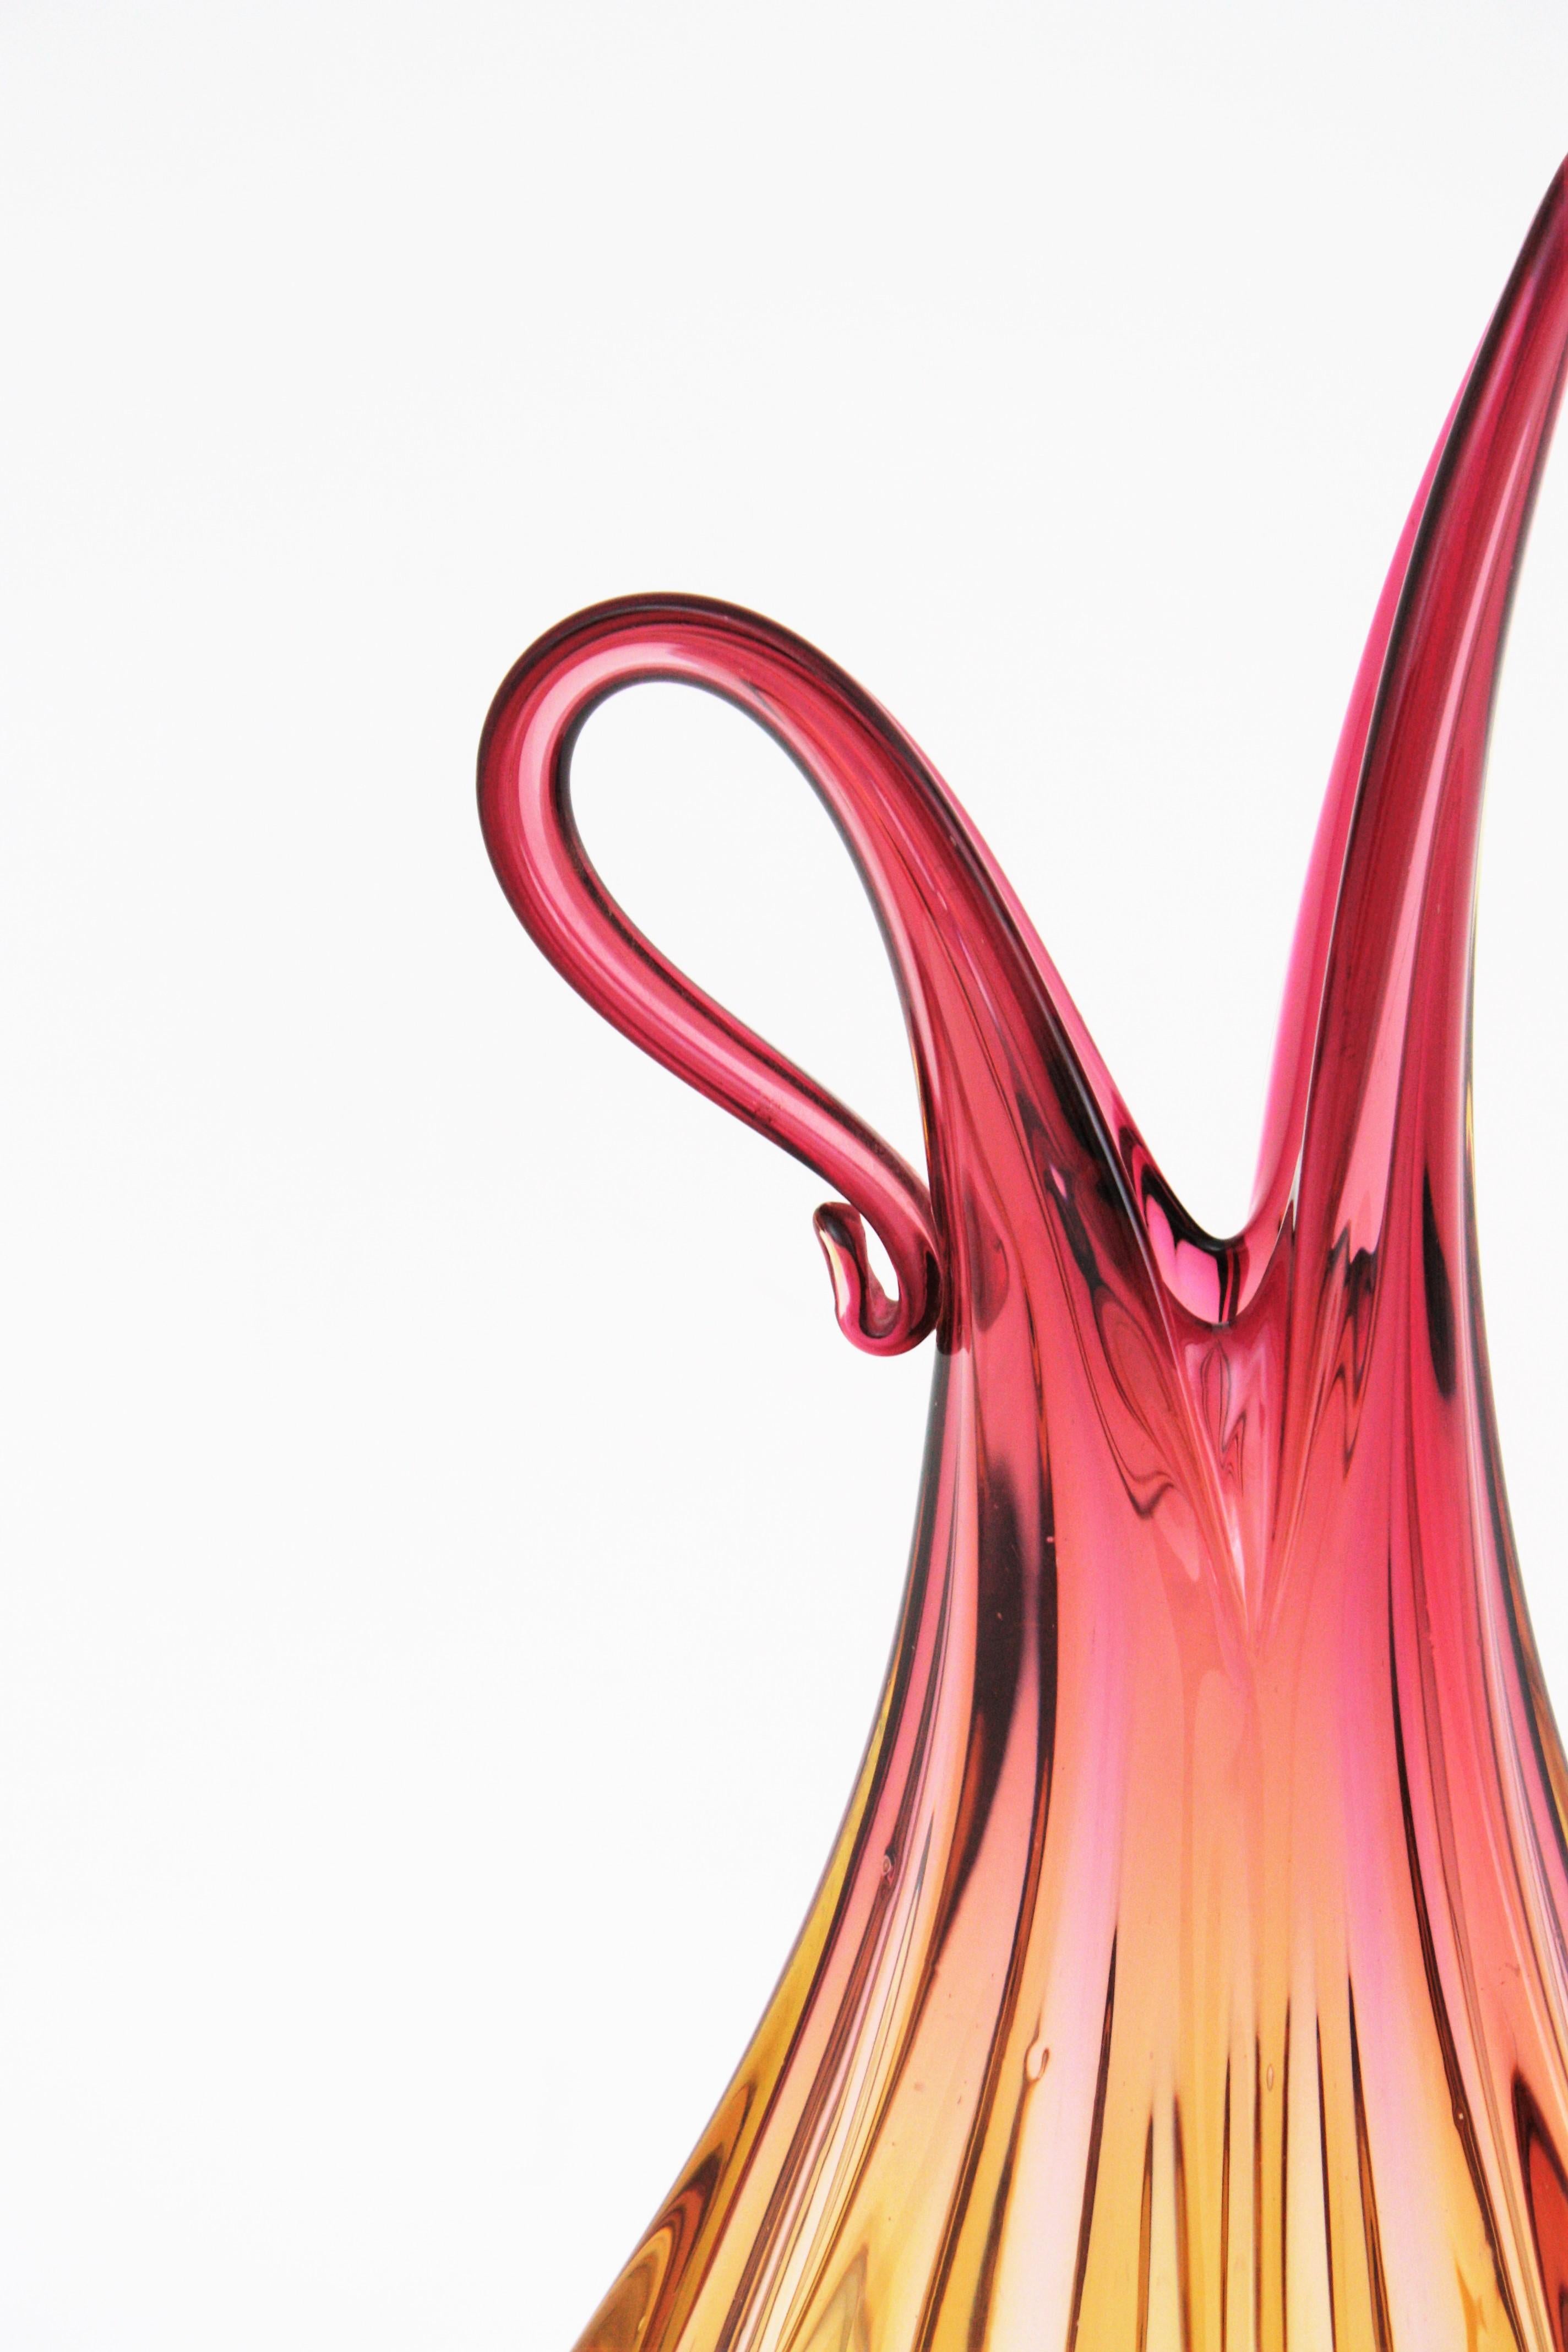 20th Century Flavio Poli Seguso Murano Pink Amber Sommerso Ribbed Art Glass Vase, 1950s For Sale